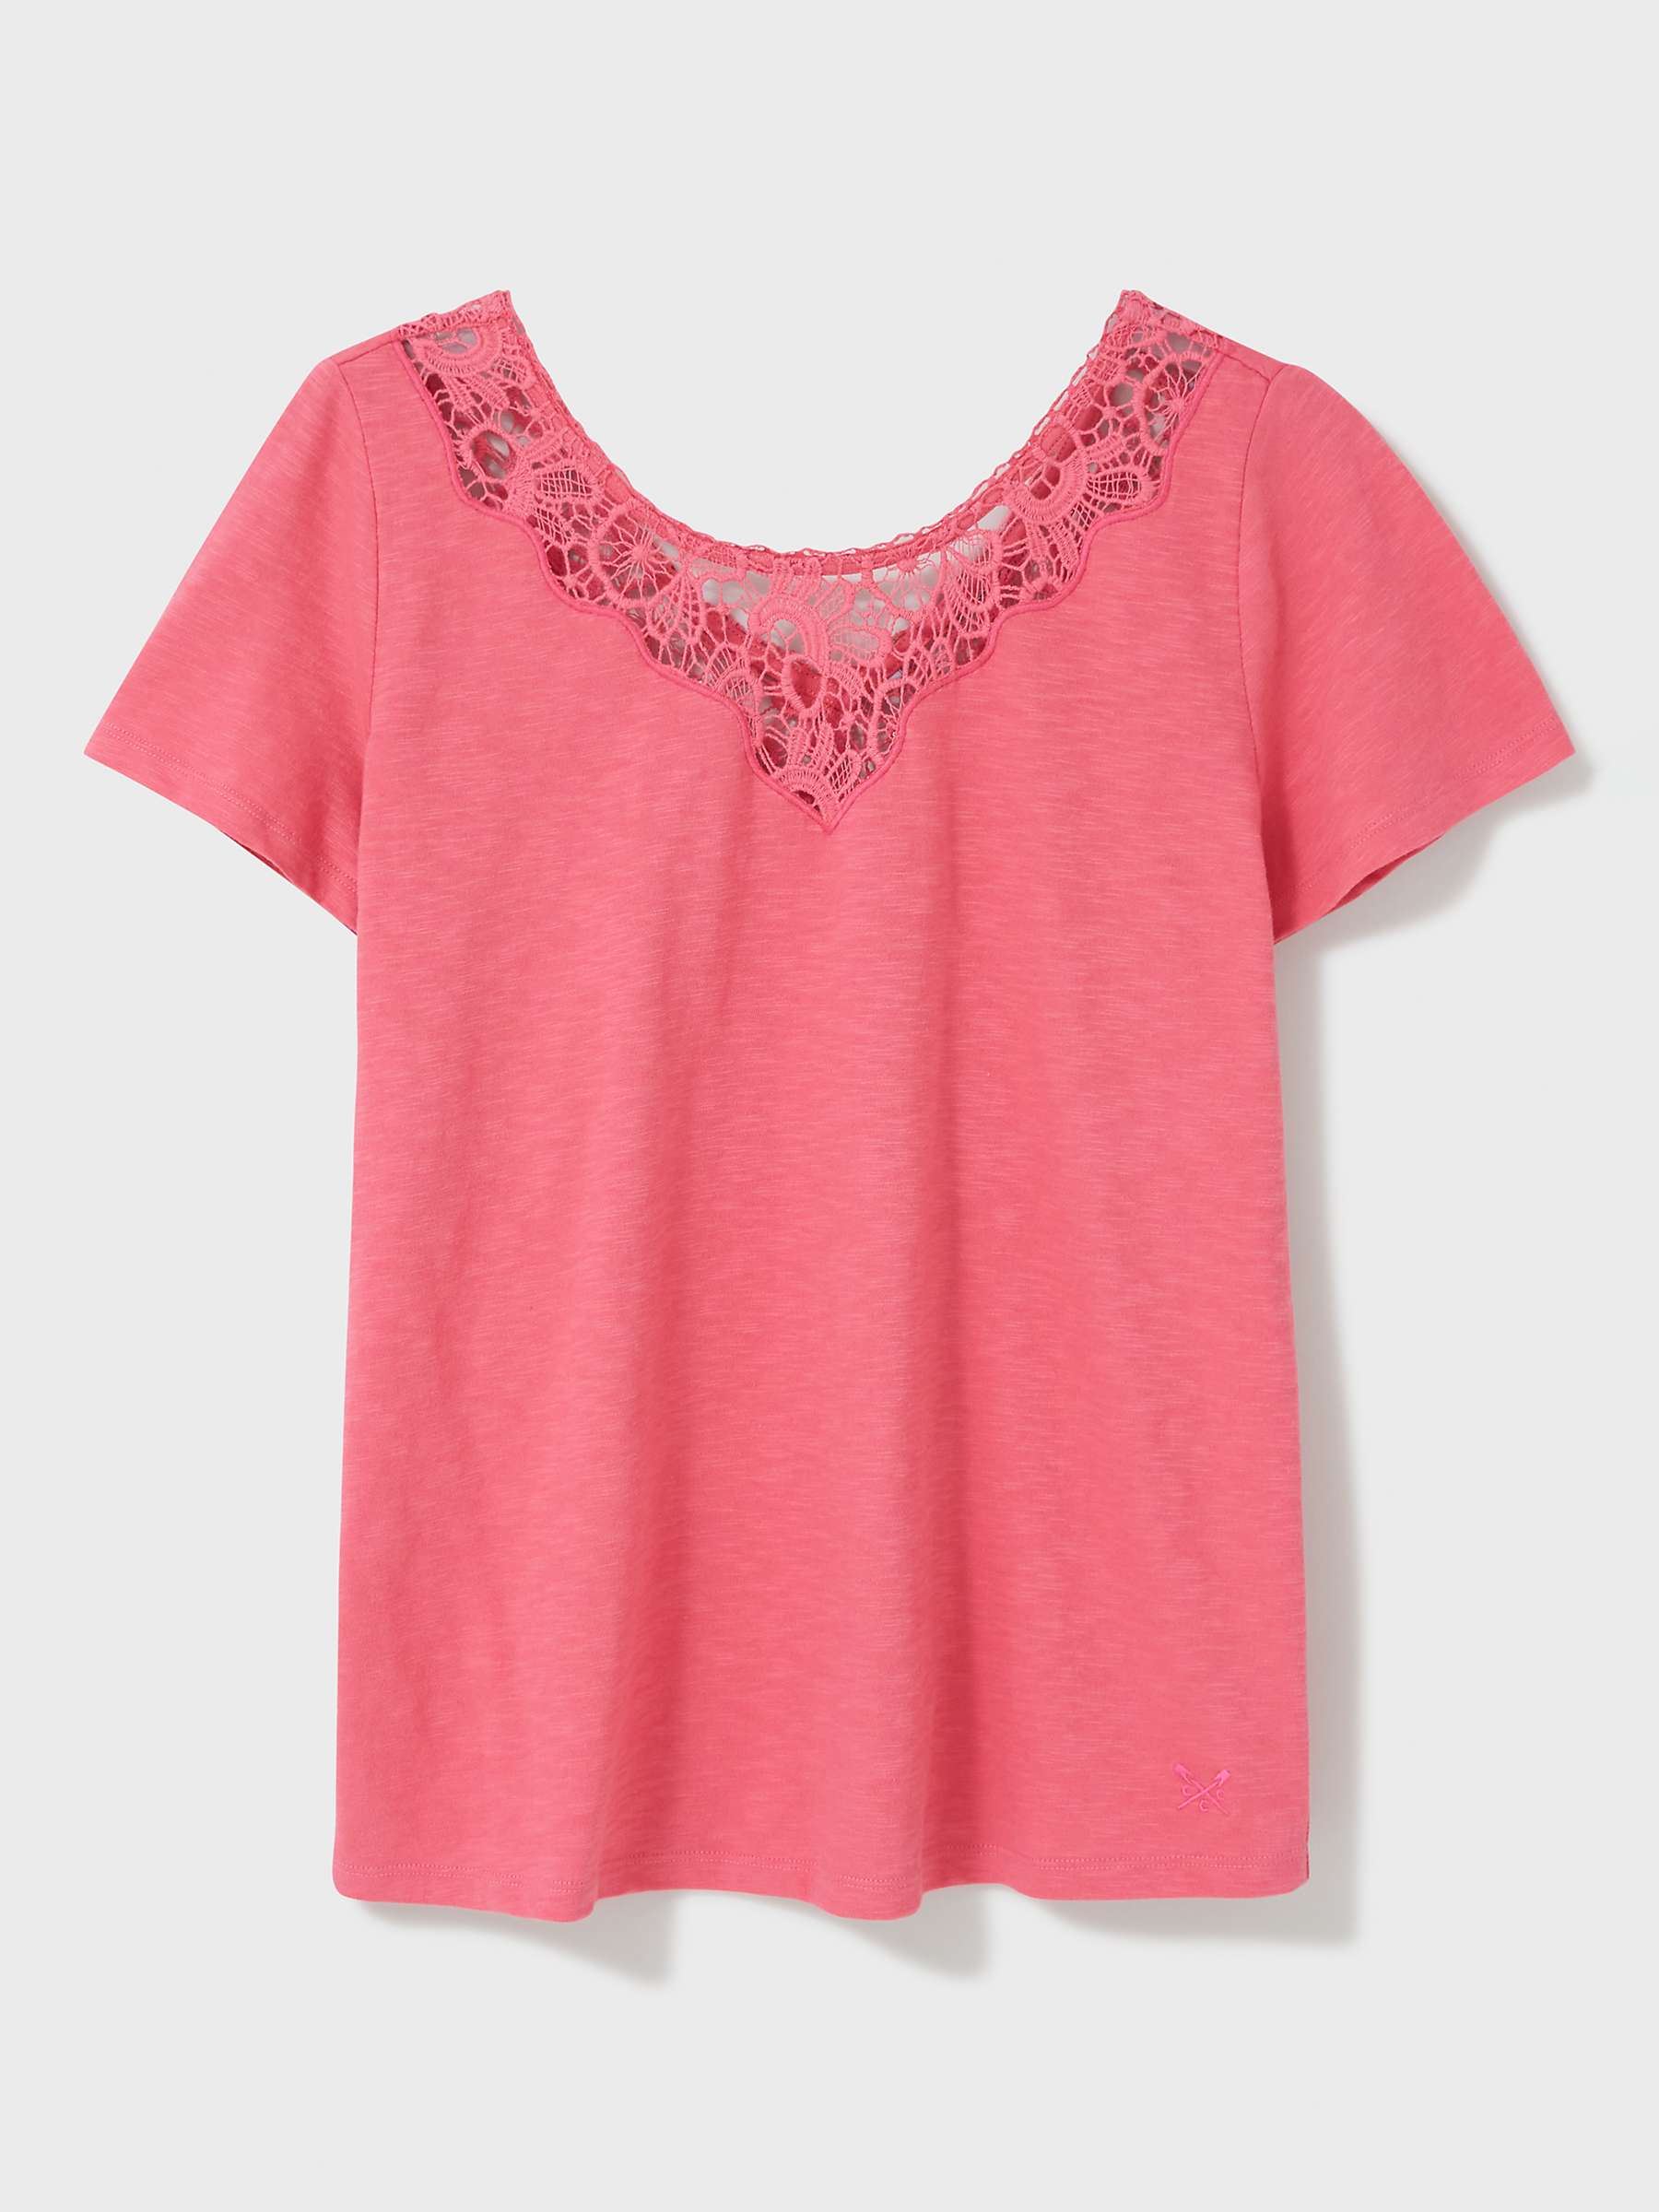 Buy Crew Clothing Iona Lace Panel Top Blue Online at johnlewis.com